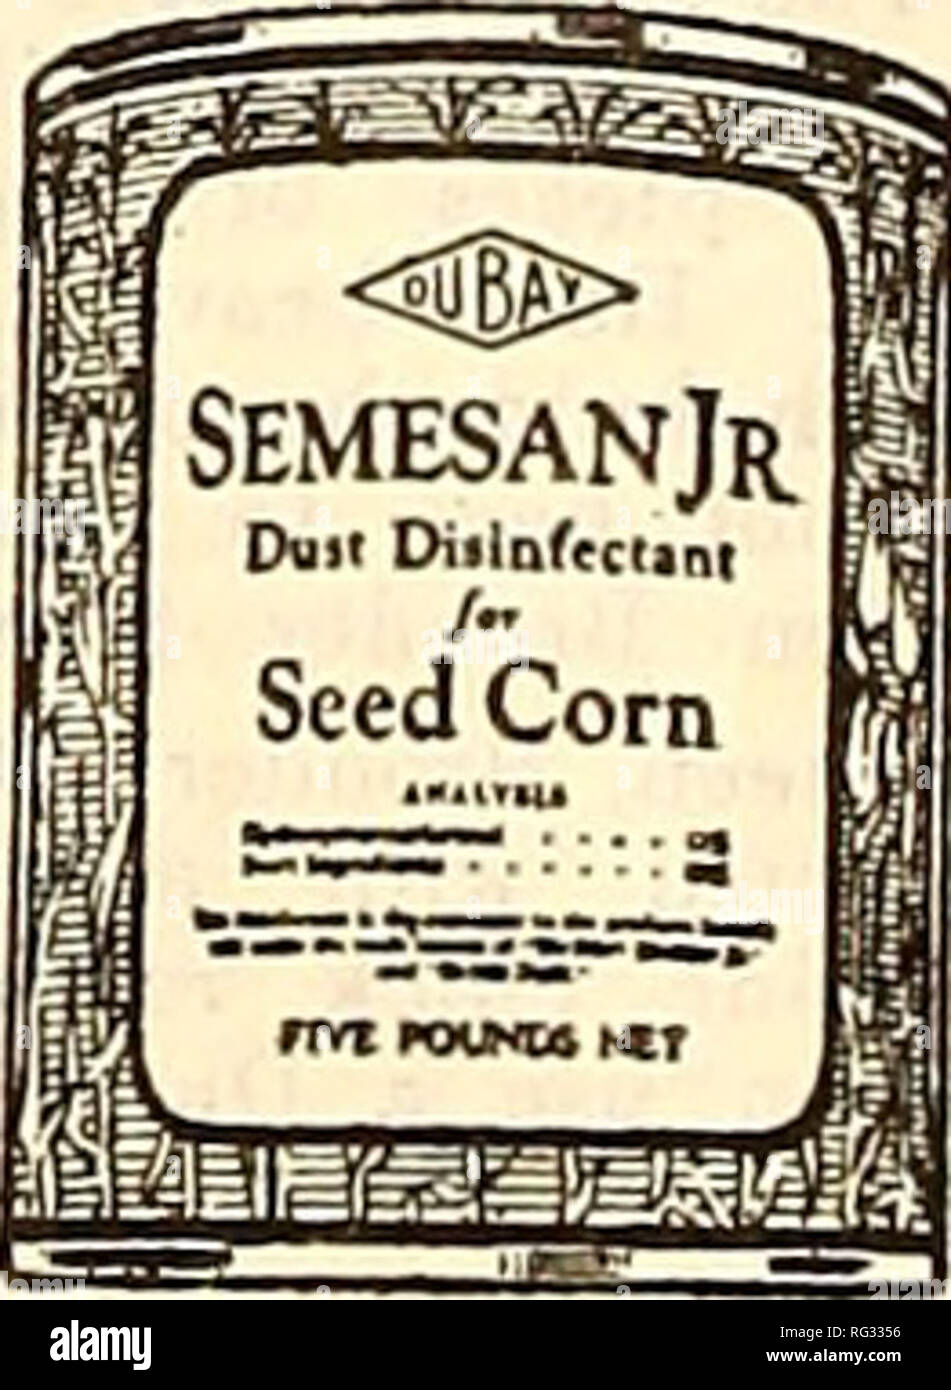 . California gardening. Nurseries (Horticulture) Catalogs; Flowers Seeds Catalogs; Plants, Ornamental Catalogs; Vegetables Seeds Catalogs; Trees Catalogs; Grasses Seeds Catalogs; Gardening Equipment and supplies Catalogs. Prices For Du Pont Semesan 2 ozs S 0.50 1 lb „.... 2.75 5 lbs 13.00 Prices for Jr. and Bel 1 lb $ 1.75 5 lbs 8.00 25 lbs ...... 31.25 Cannot be mailed.. QUICKLY KILLS GARDEN PESTS Science Provides New Safe Method that Does the Work Without Fuss Snails, Cutworms, Slugs, Grasshoppers, Sowbugs, Earwigs, etc., are Exterminated Snarol is a ready prepared meal that you simply broad Stock Photo